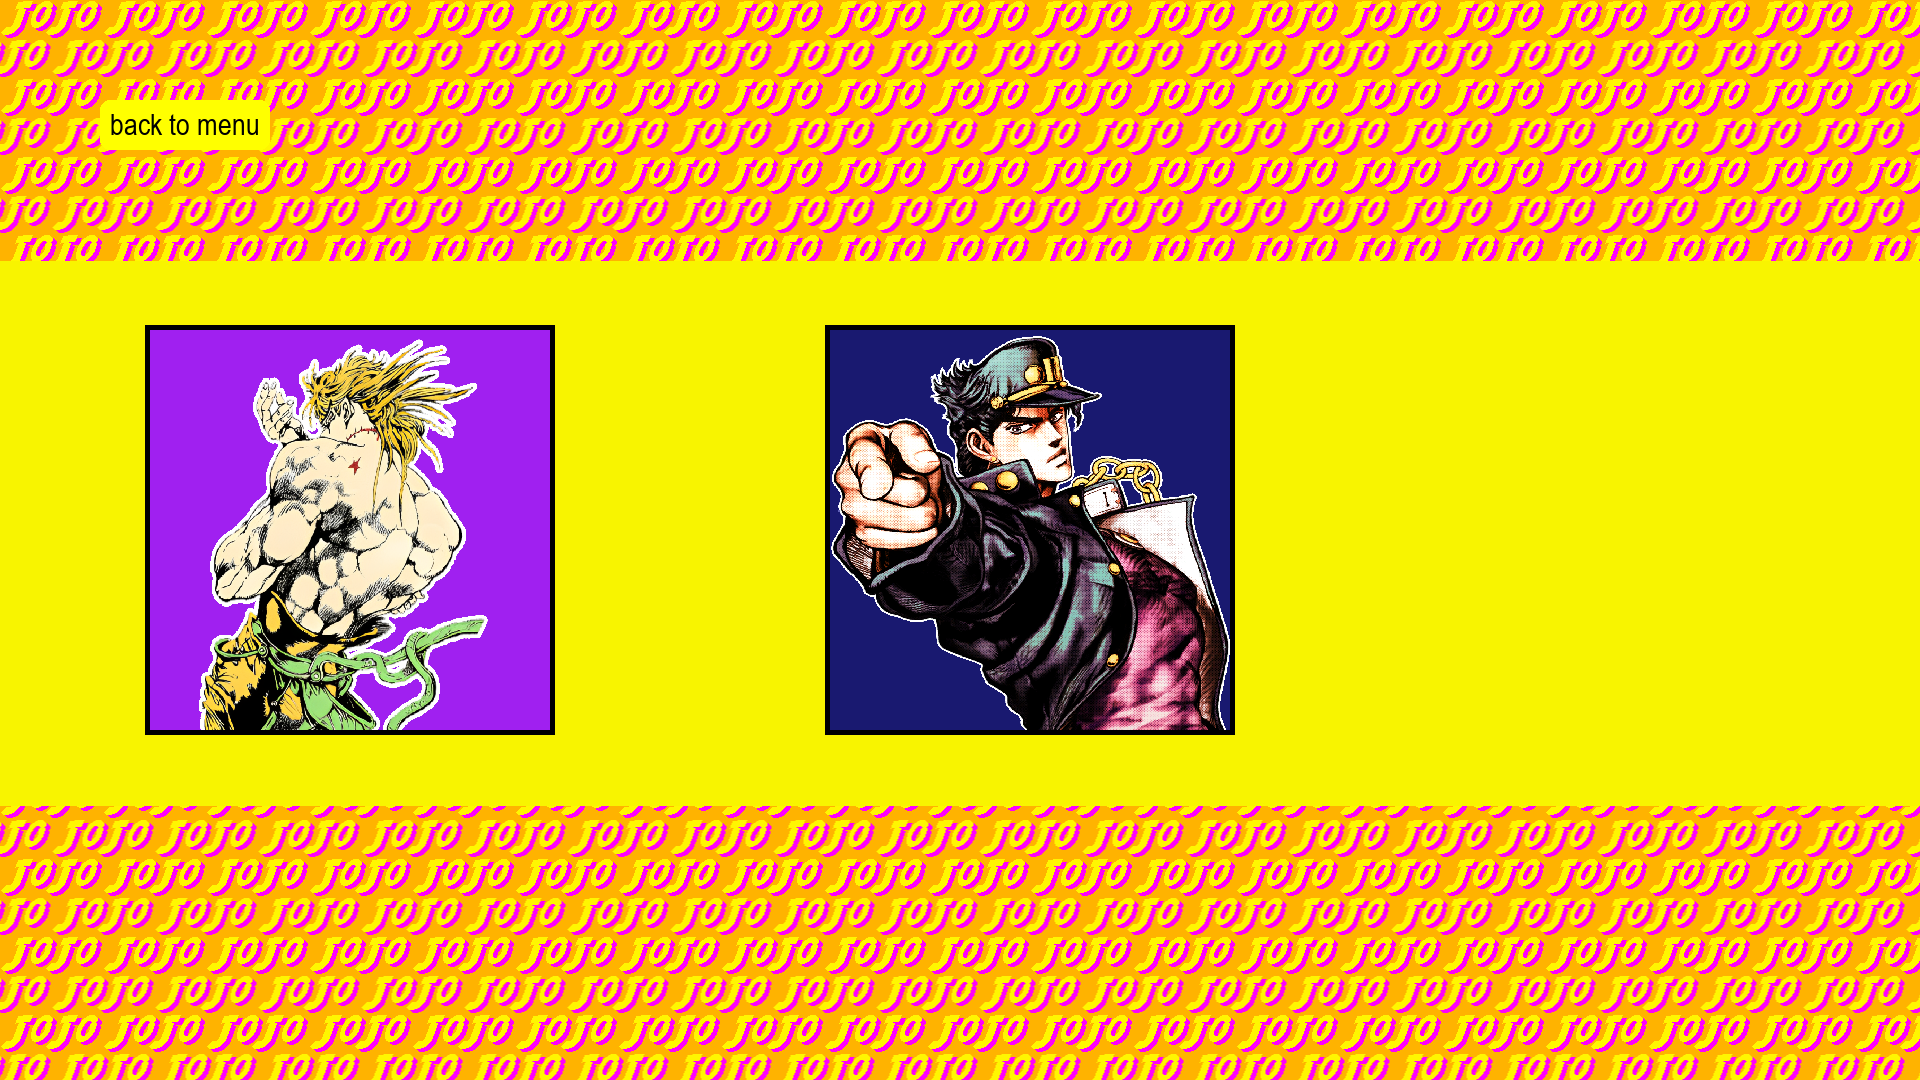 Stand For Justice (JoJo) (beta) by TheOnlyRealYT